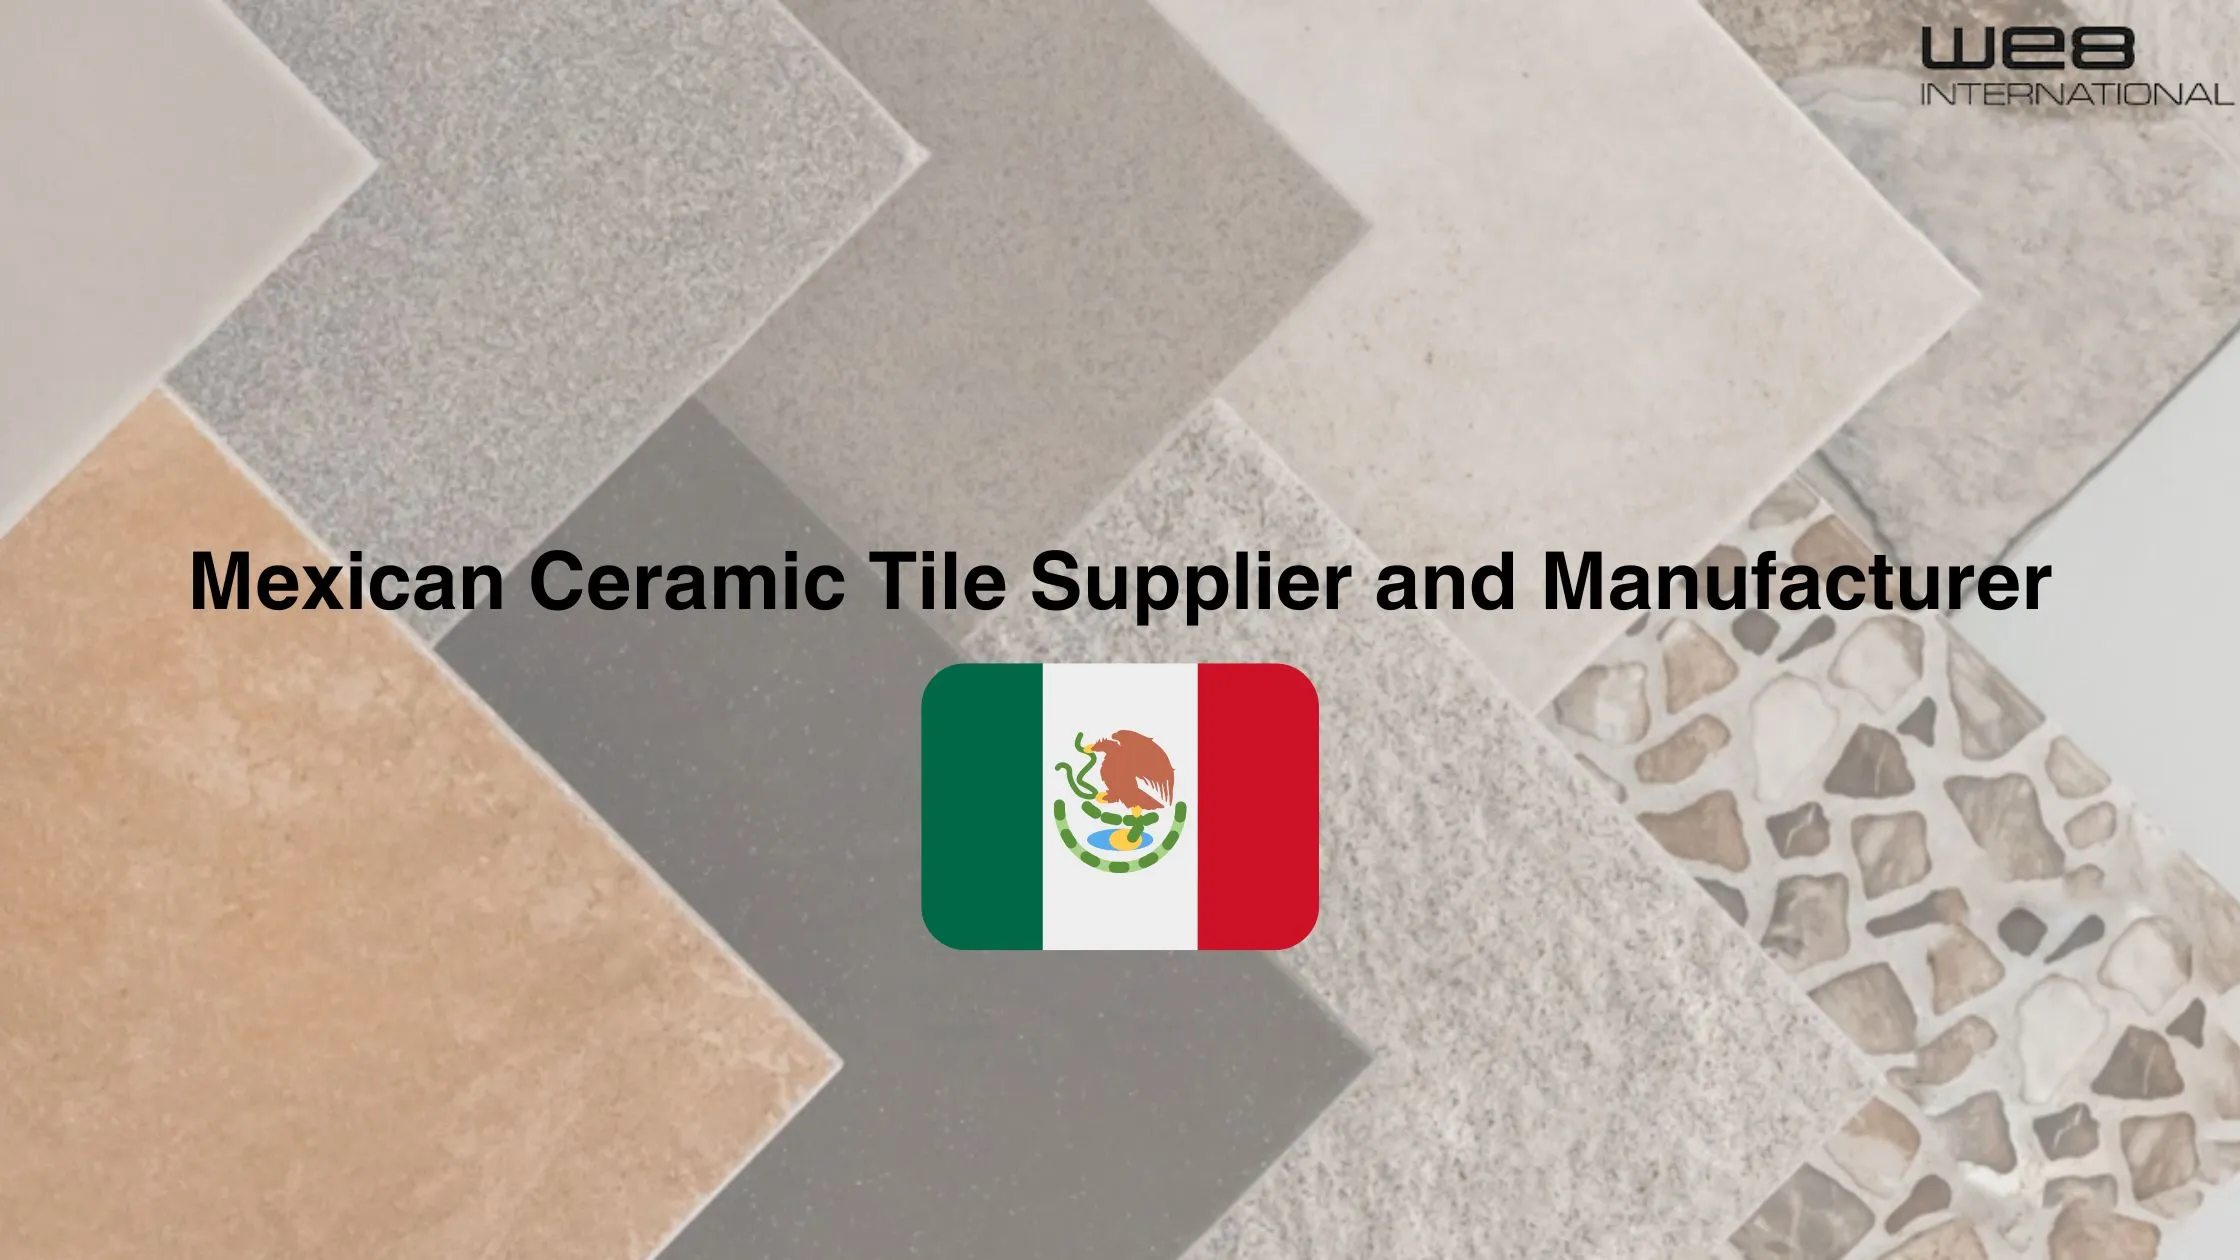 Mexican Ceramic Tile Supplier and Manufacturer